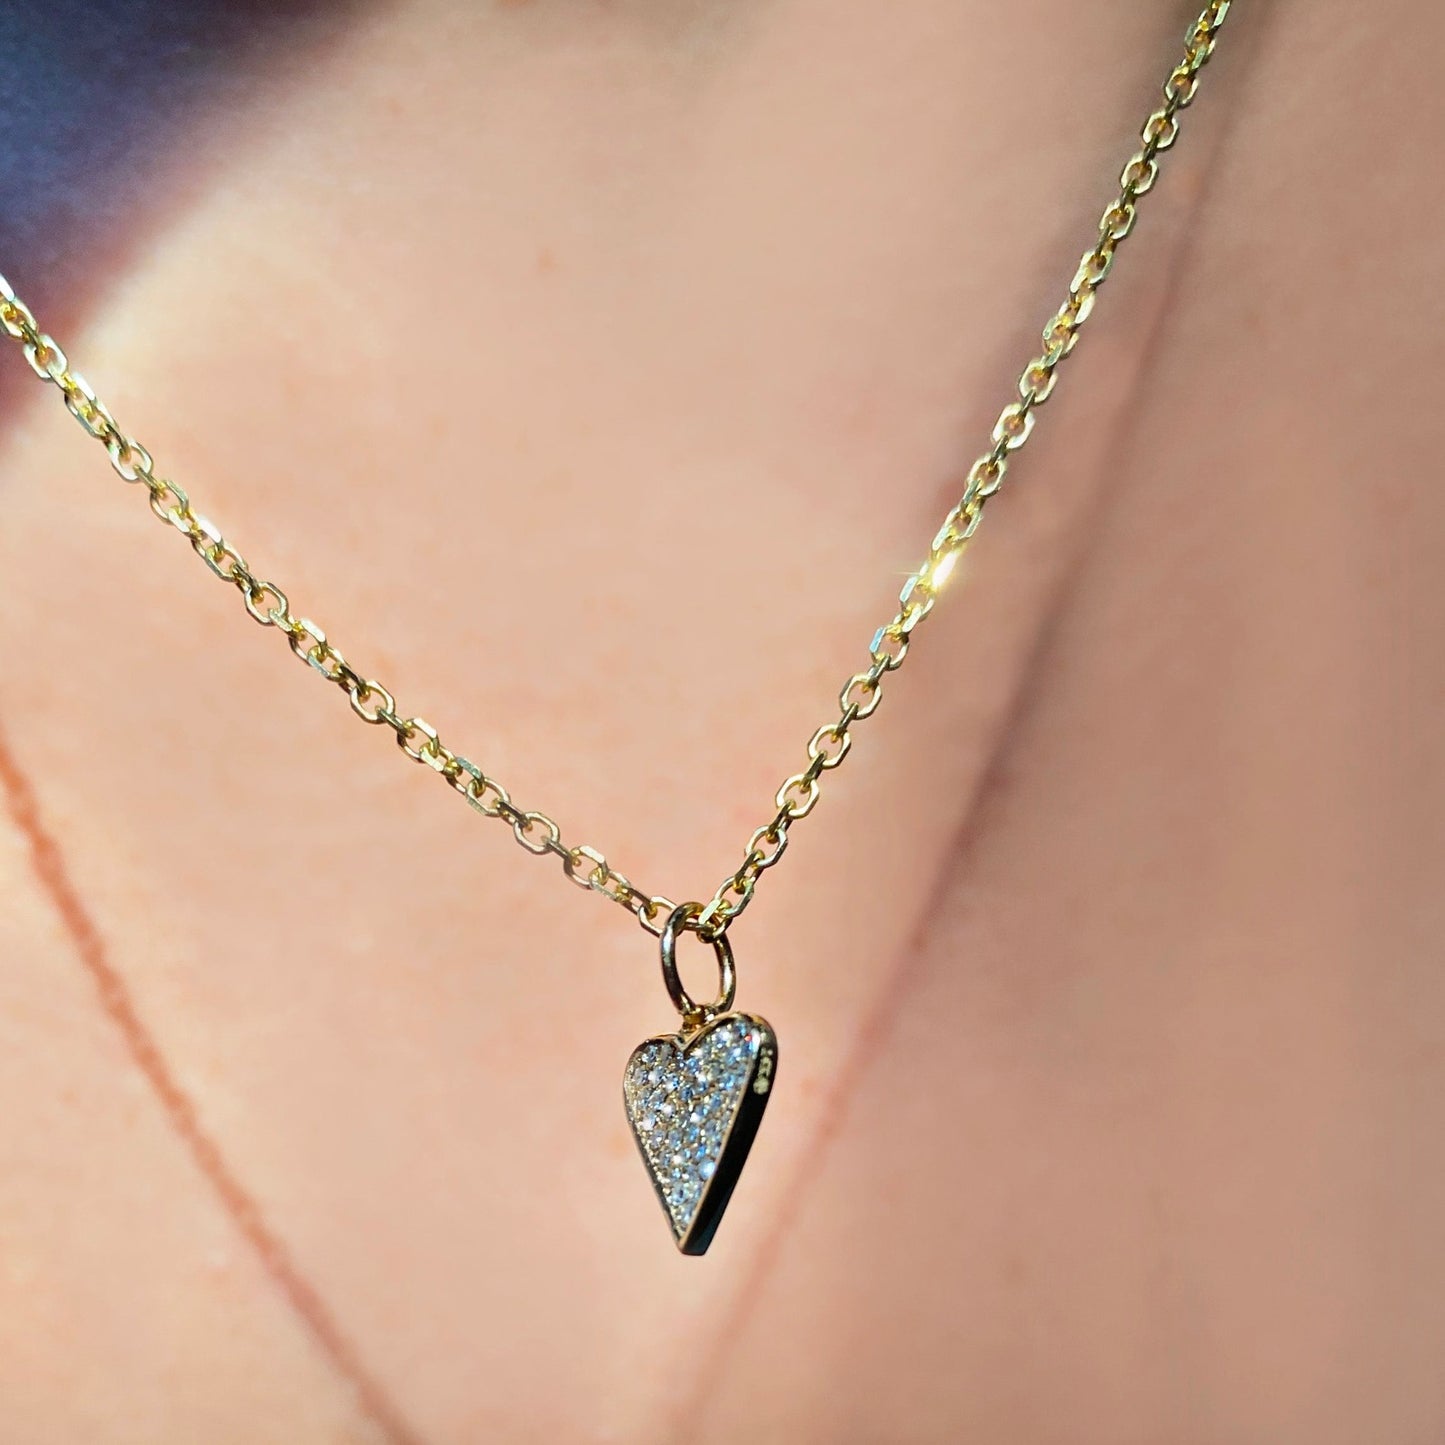 14k gold Diamond Cut Cable Chain Necklace. Styled on a neck with a medium pave heart charm